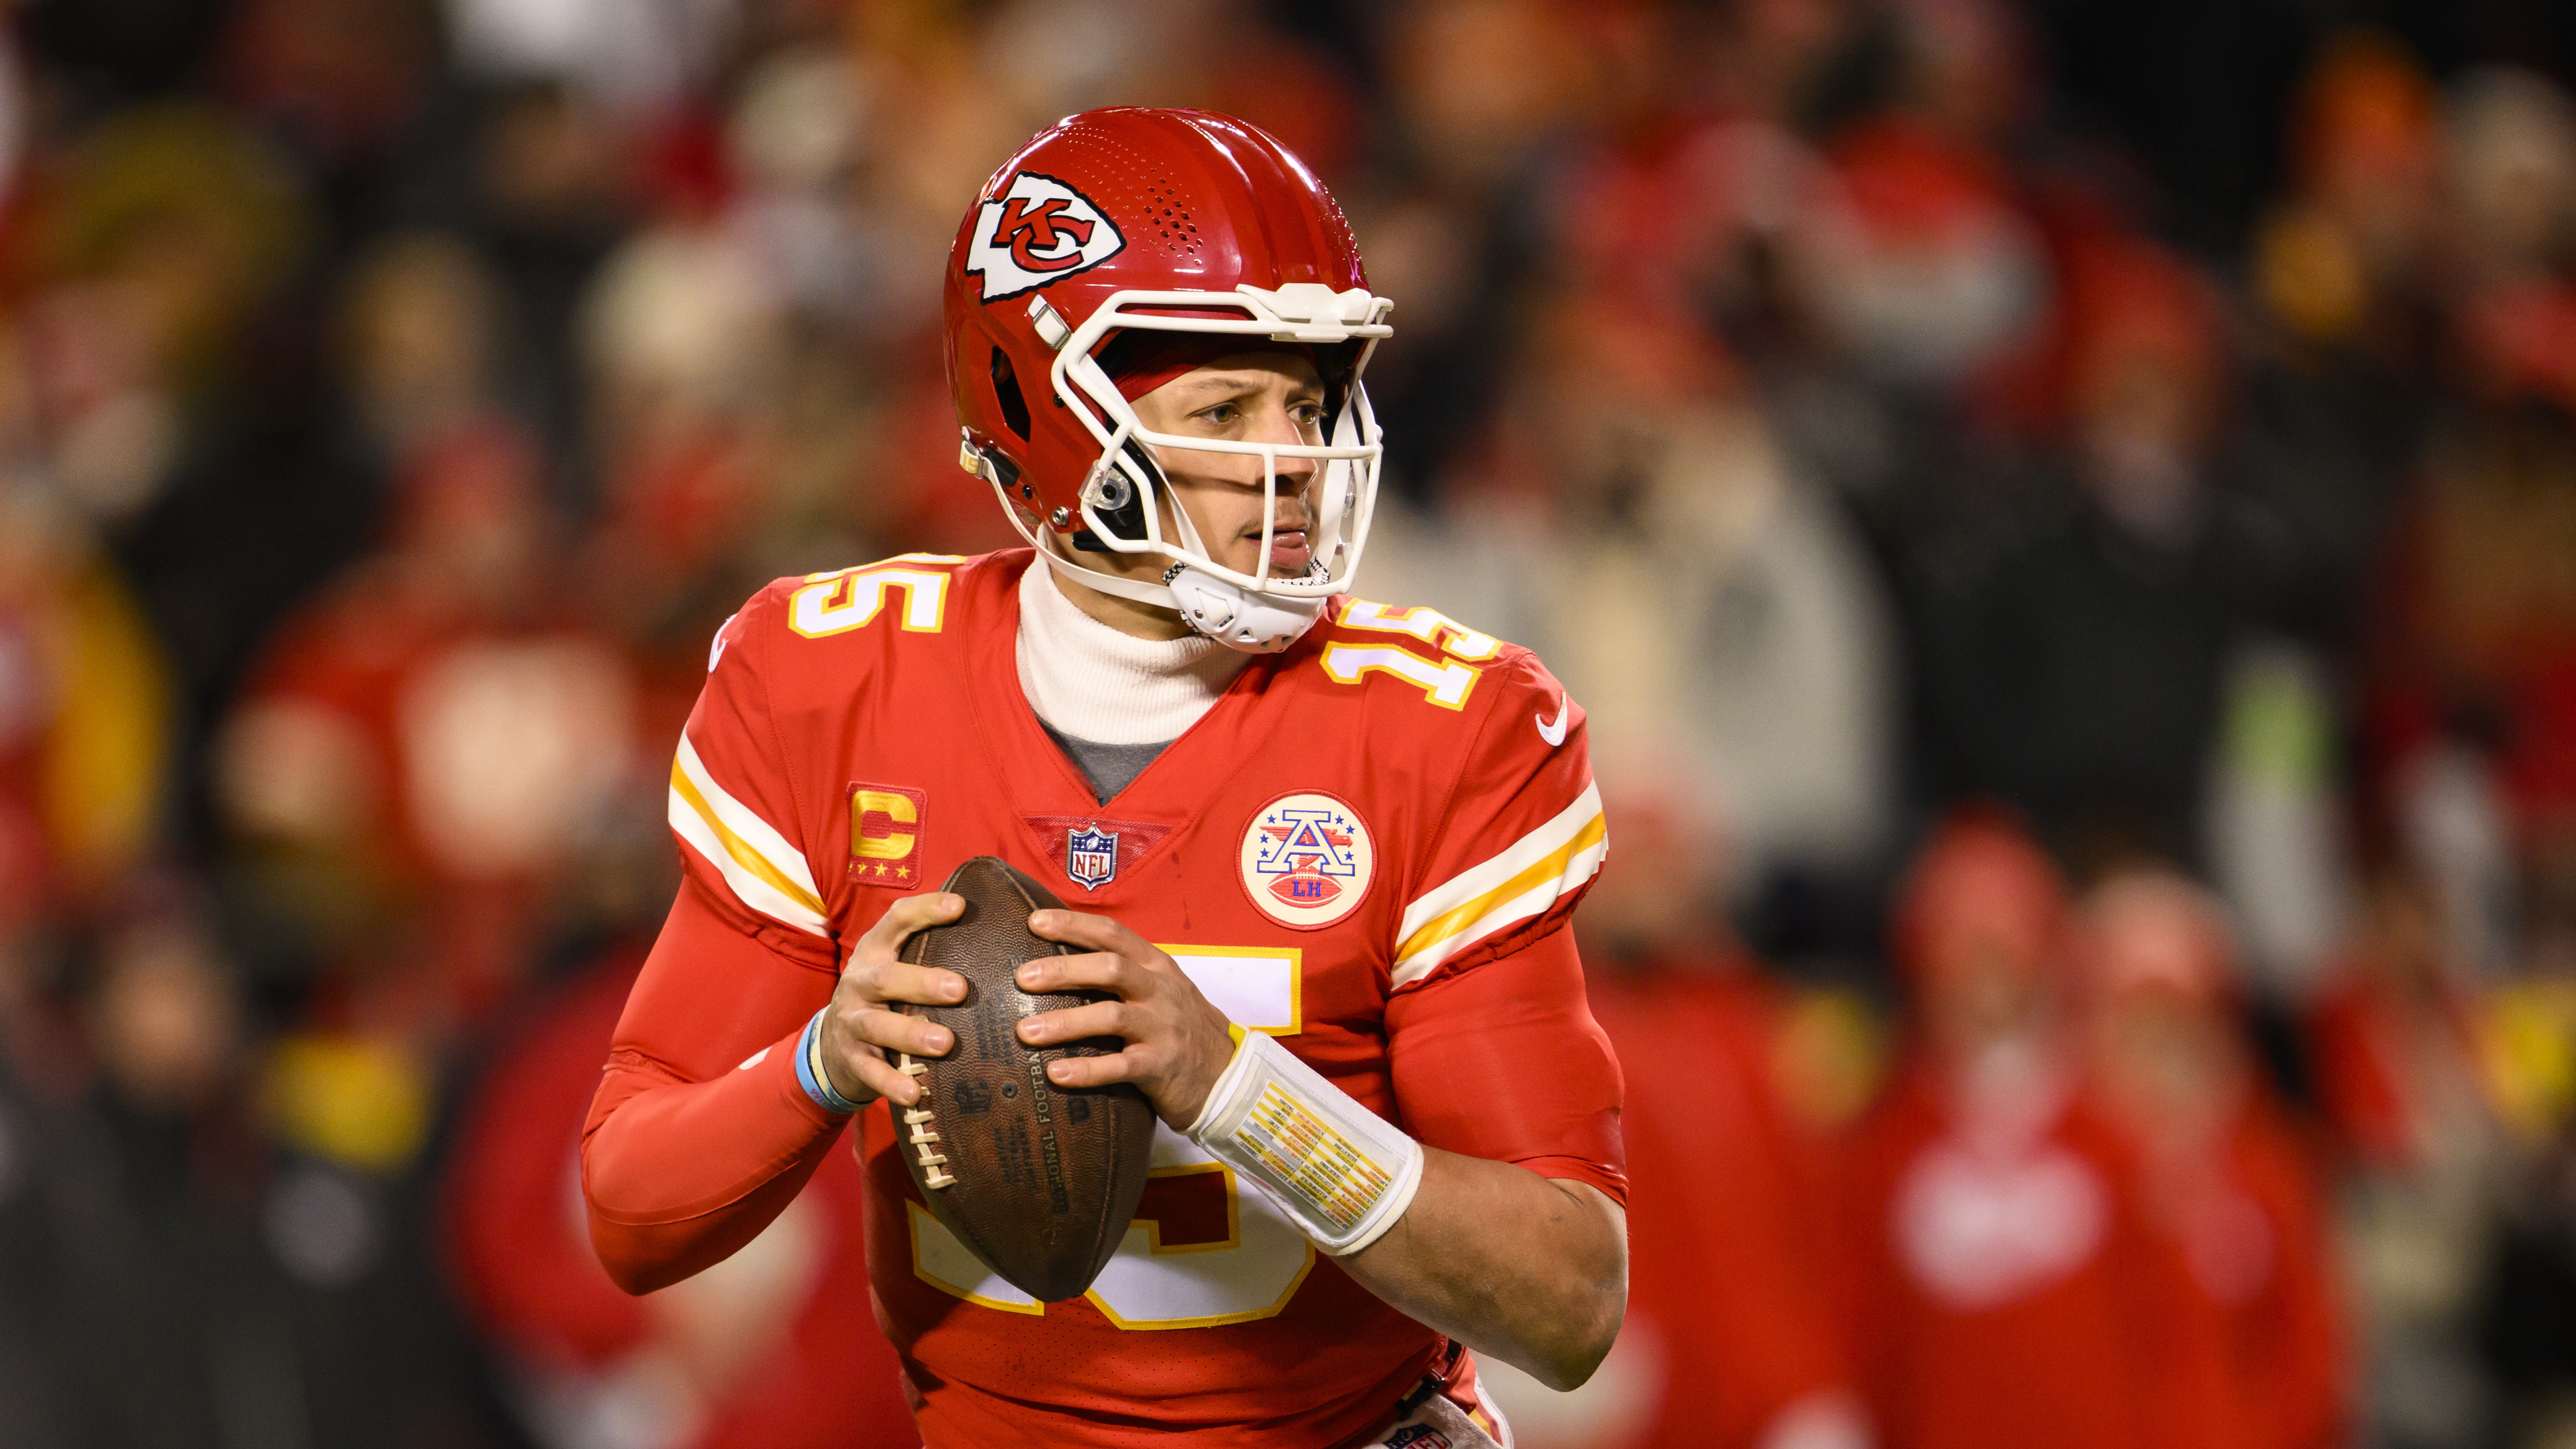 Patrick Mahomes will play in the AFC Championship Game next Sunday